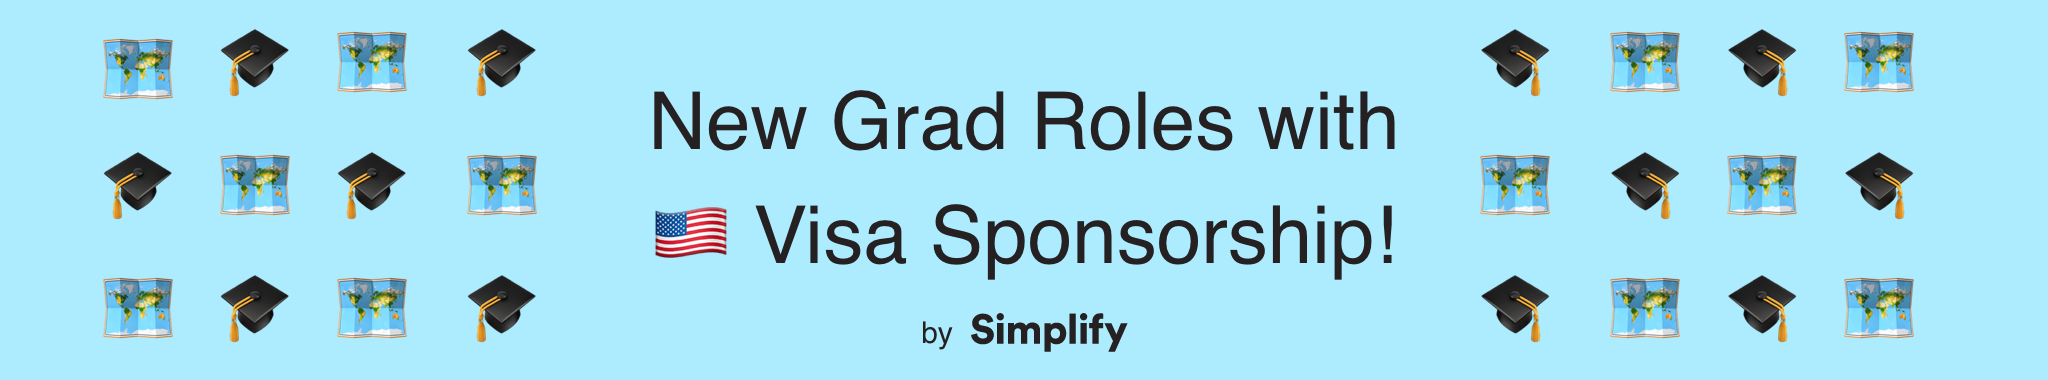 text that says “New Grad Roles with Visa Sponsorship!” surrounded by graduation cap and map emojis